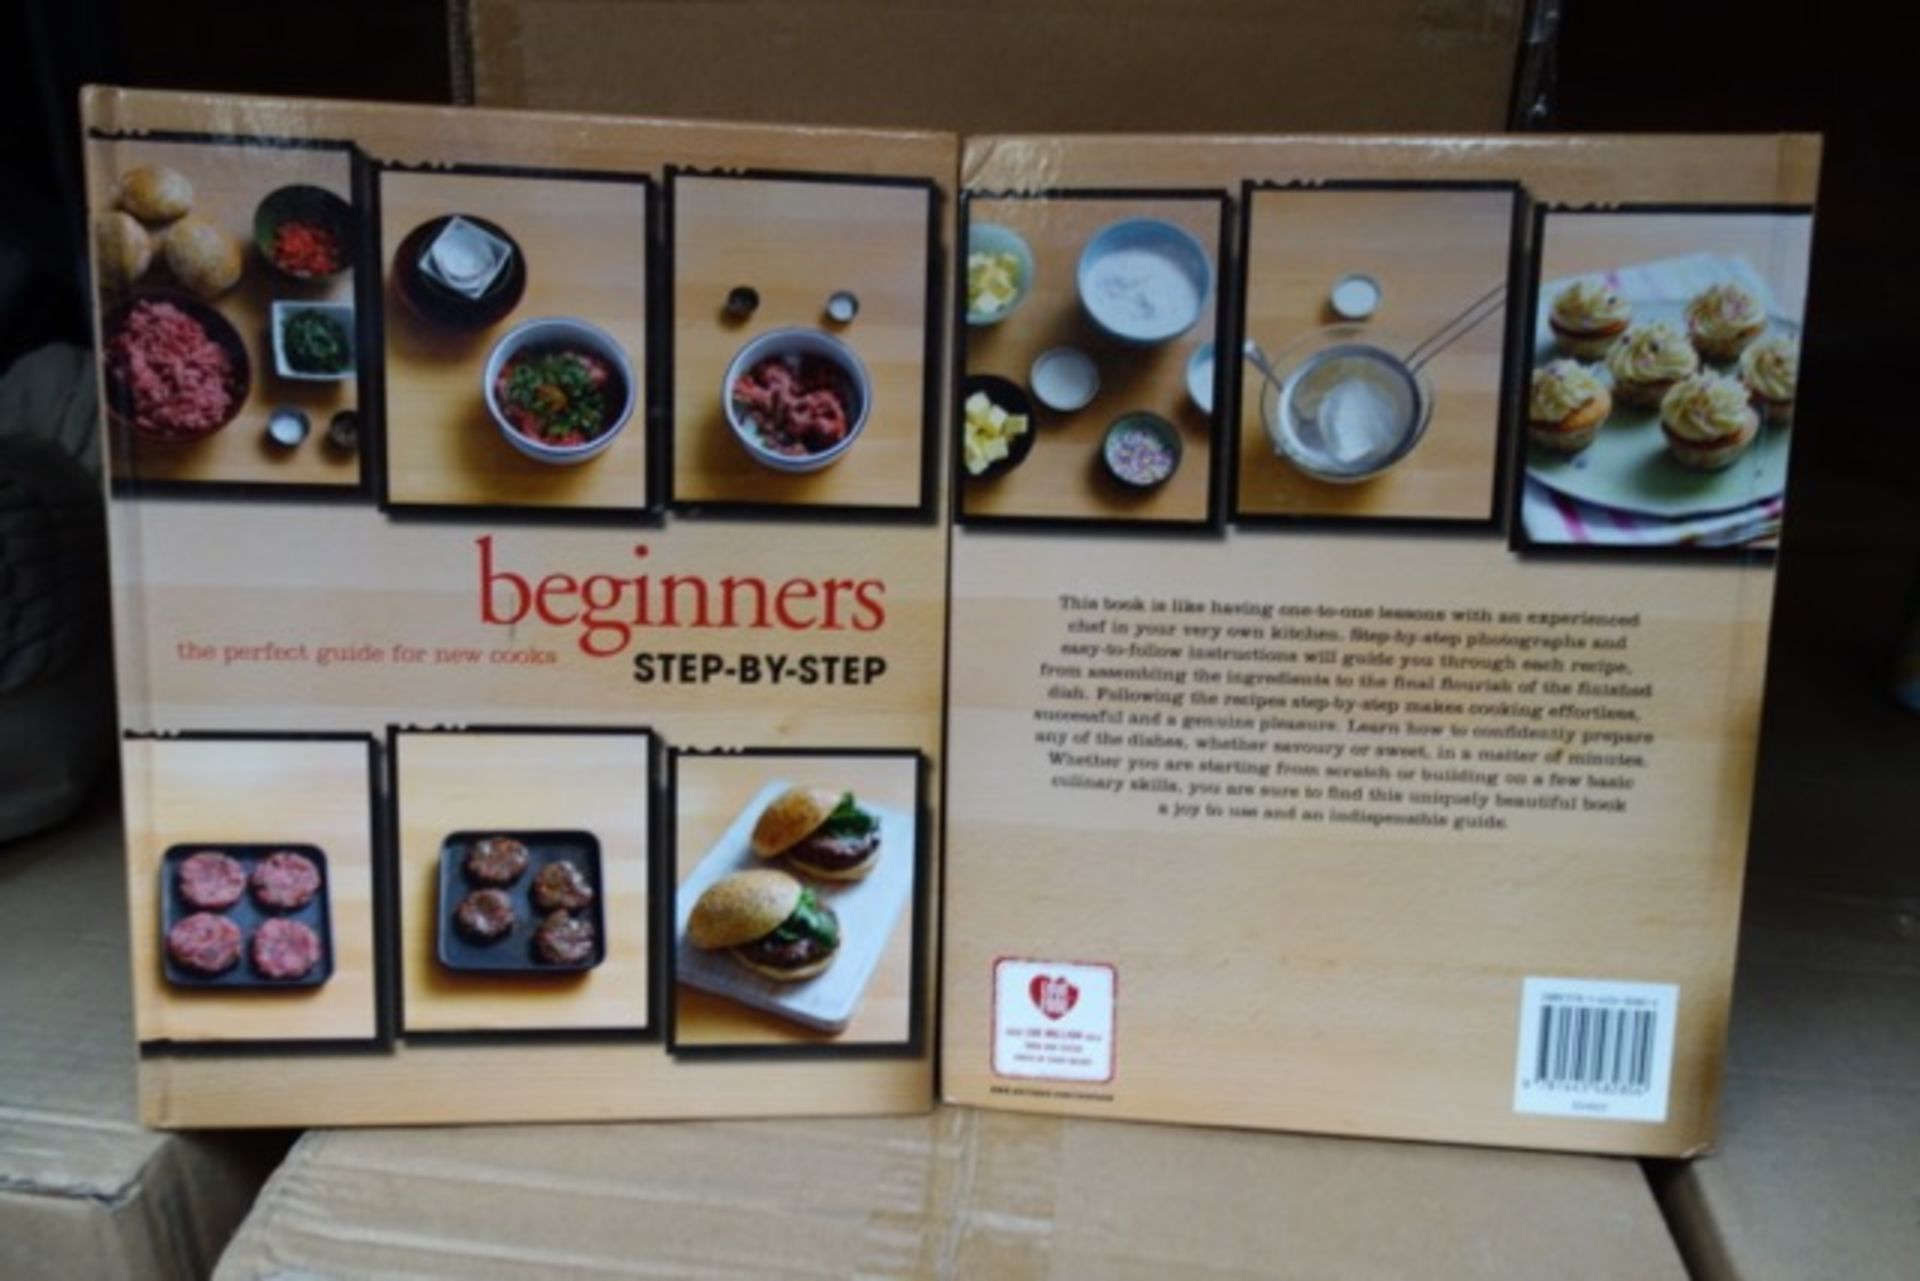 60 x Lovefood Beginners Step-by-step The Perfect Guide for New Cooks. RRP £11.99 each, total RRP